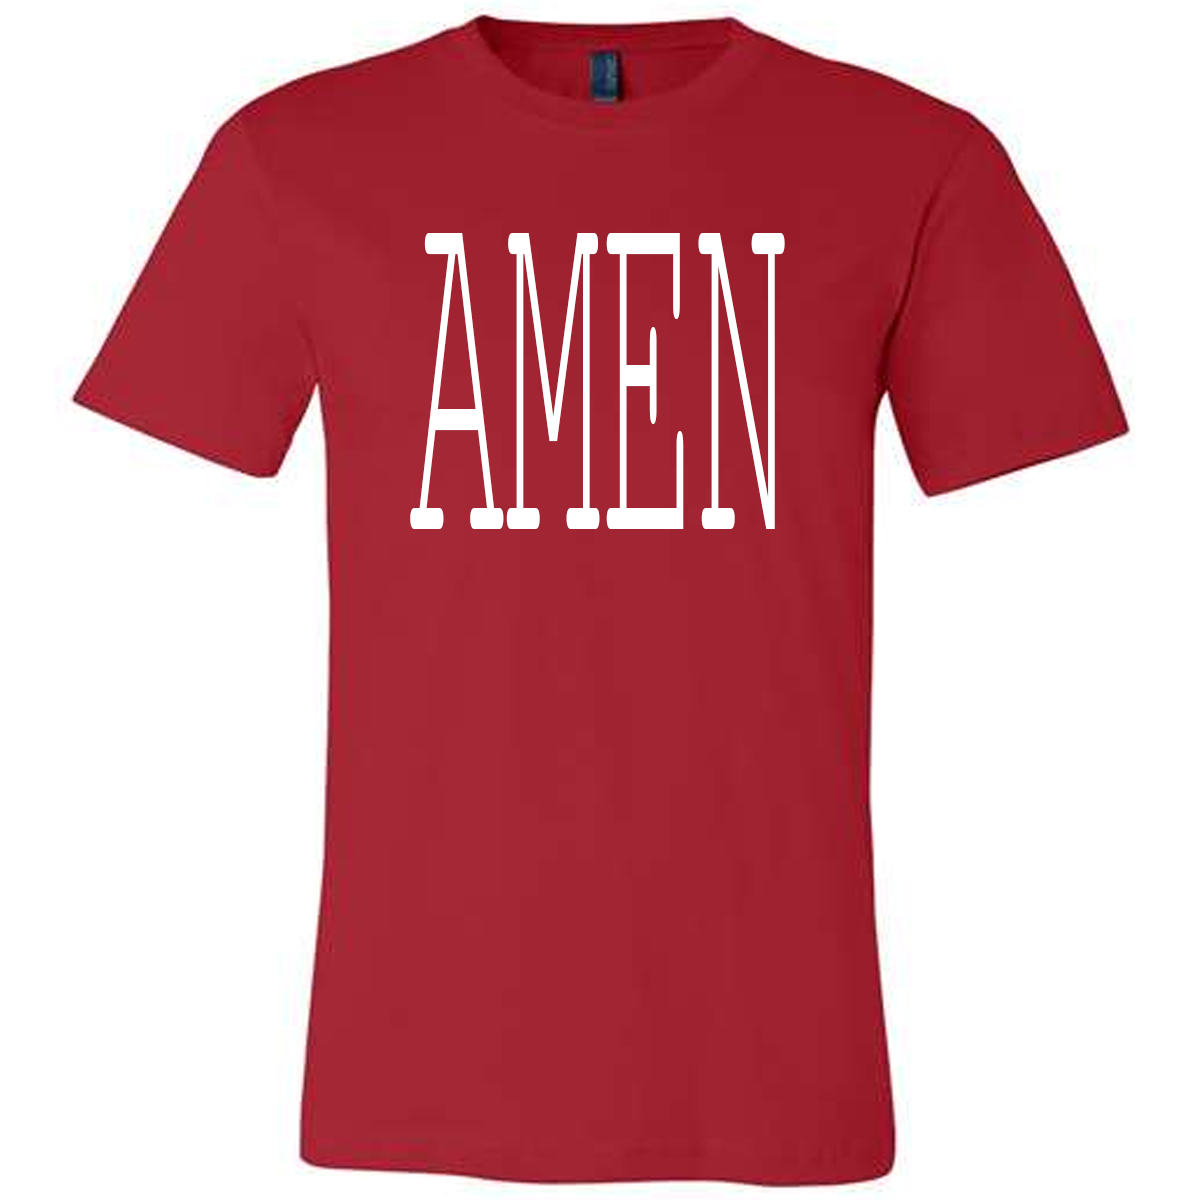 Amen Big - Red Tee - Southern Grace Creations